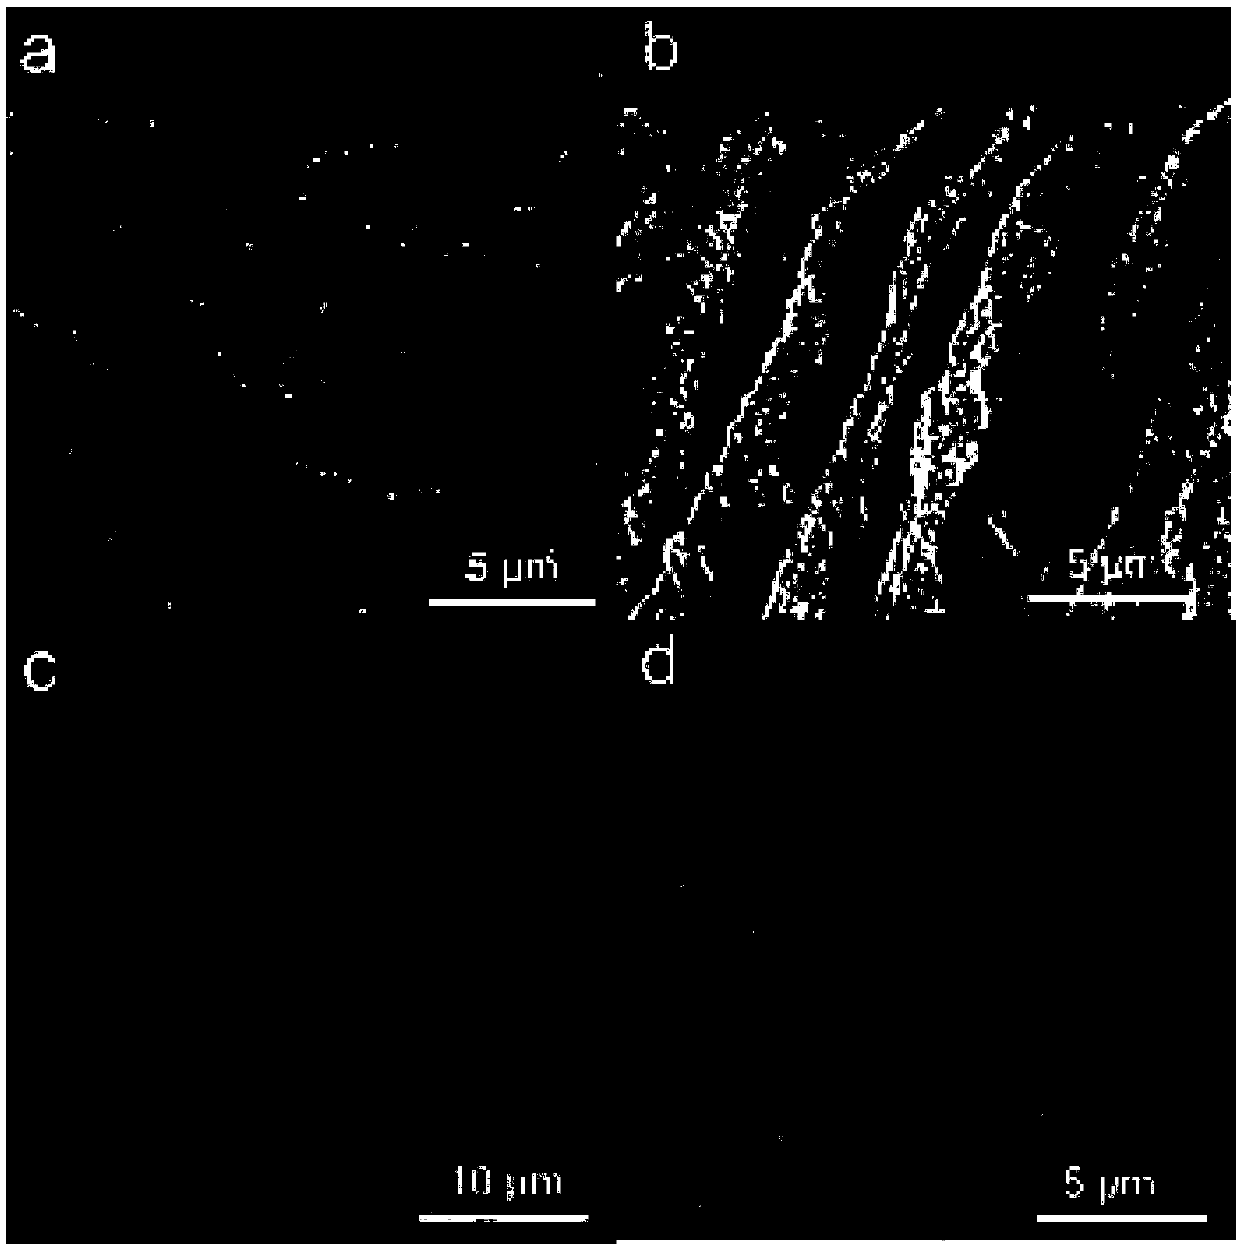 Tooth desensitizer penetrating into closed canaliculi dentales and preventing biomembrane from formation